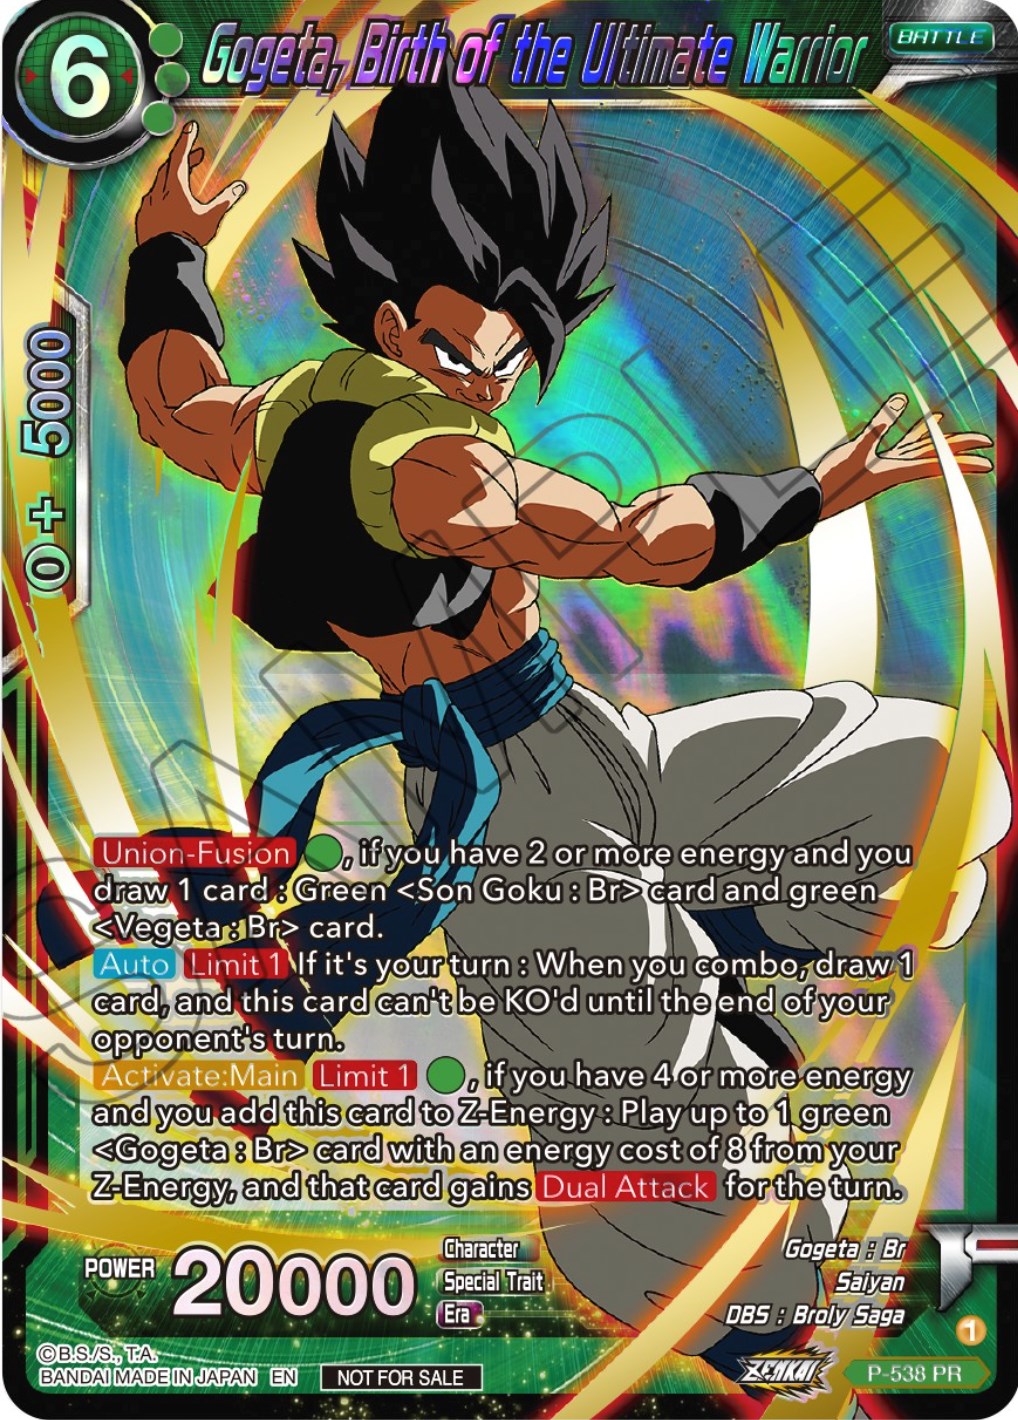 Gogeta, Birth of the Ultimate Warrior (Championship Selection Pack 2023 Vol.2) (Gold-Stamped Shatterfoil) (P-538) [Tournament Promotion Cards] | Shuffle n Cut Hobbies & Games